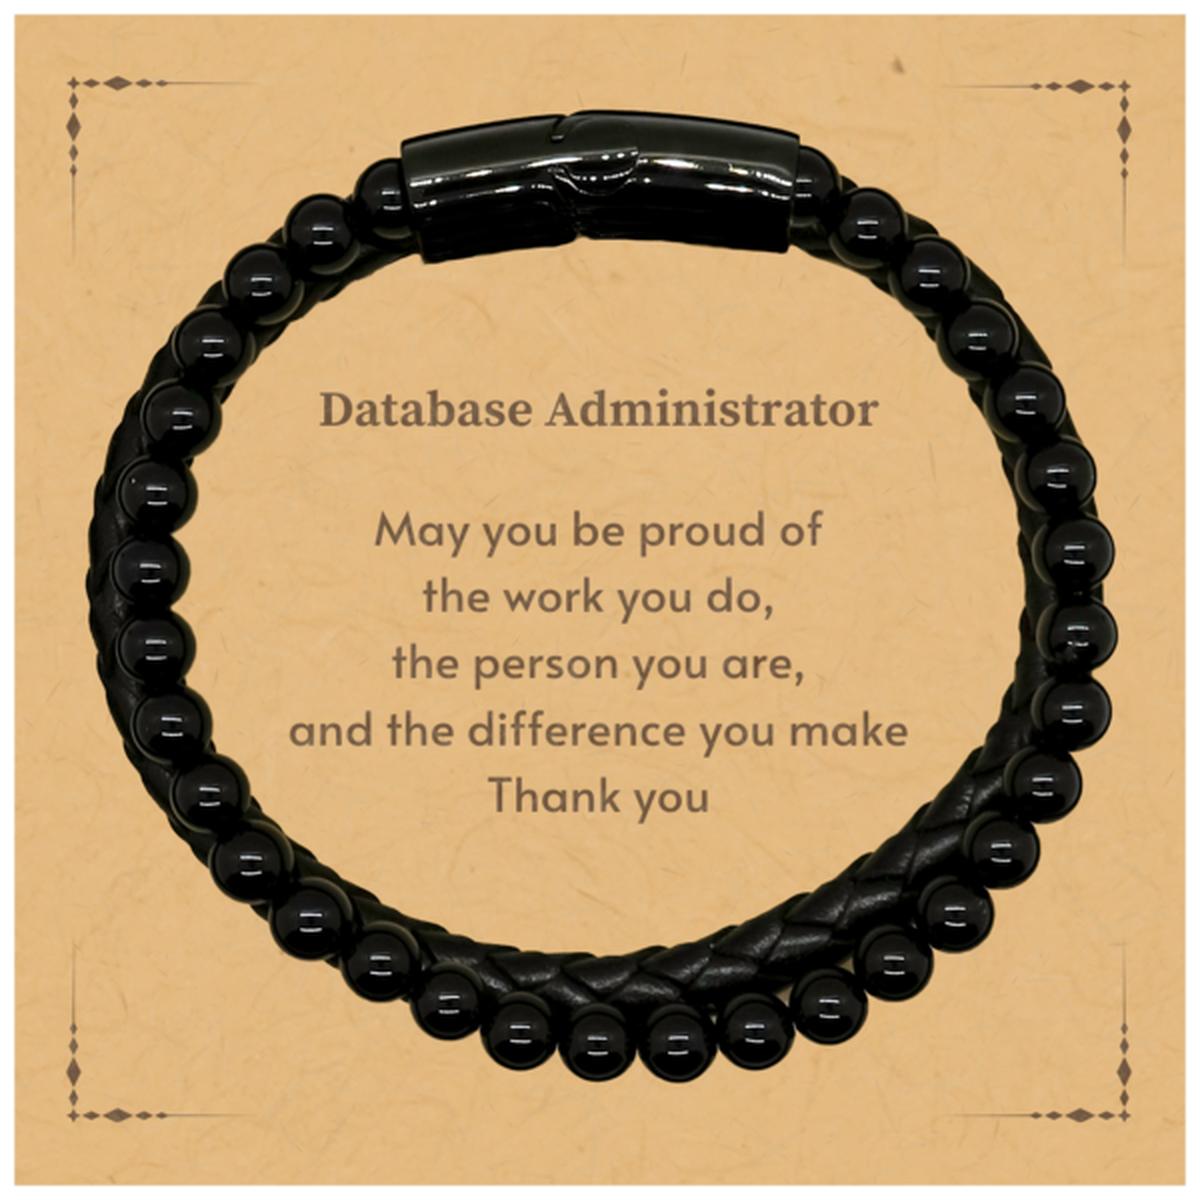 Heartwarming Stone Leather Bracelets Retirement Coworkers Gifts for Database Administrator, Database Administrator May You be proud of the work you do, the person you are Gifts for Boss Men Women Friends